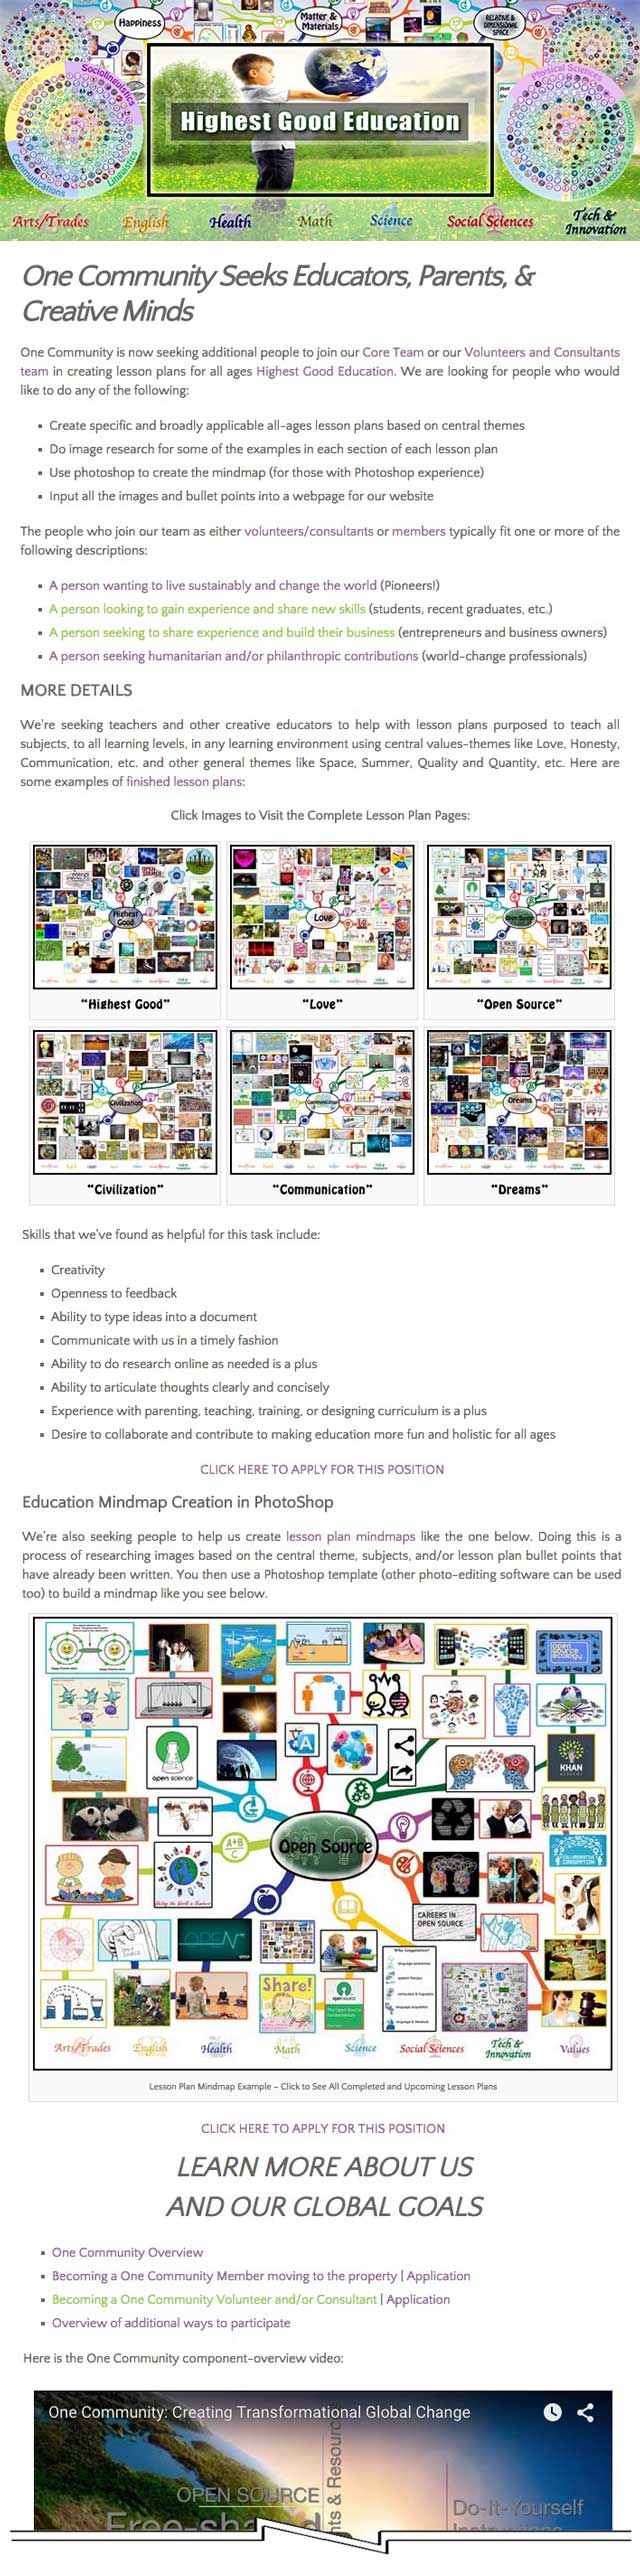  updated the Seeking Educators and Creative Minds page and associated help-wanted ads and requests, One Community